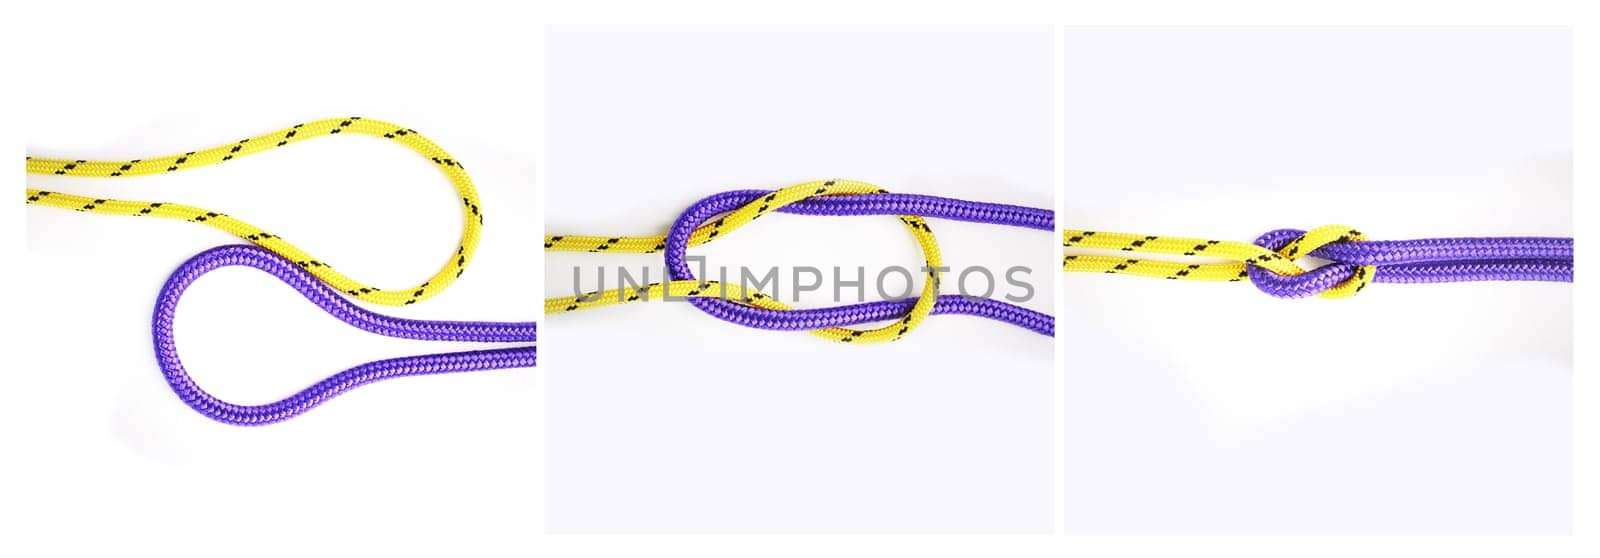 Sailor, knot and how to tie with rope in tutorial, guide or info steps to connect string for security. Creative, pattern and template instructions to loop textile thread in chain with strong link by YuriArcurs